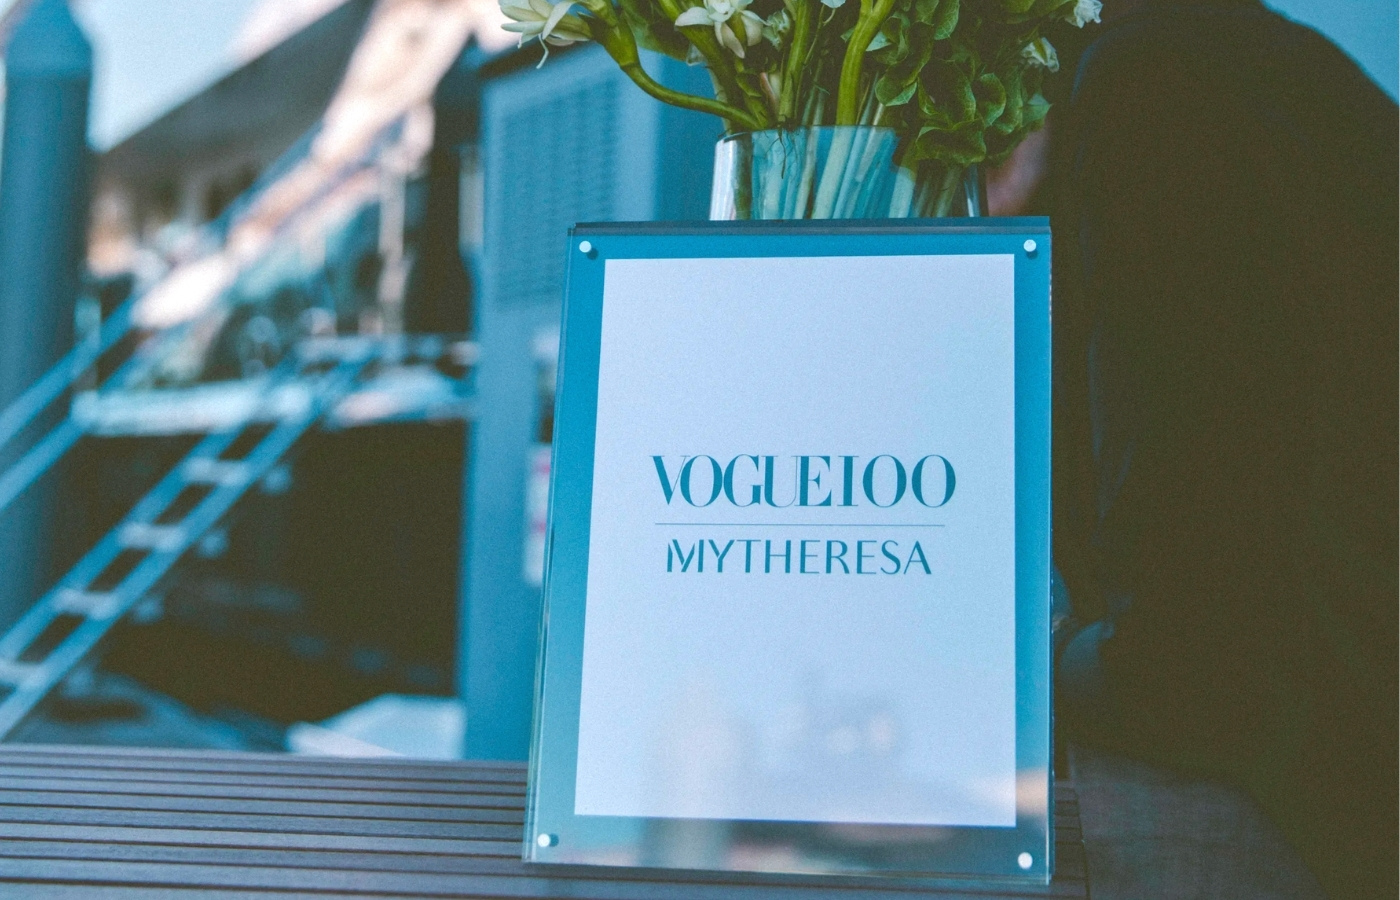 Vogue100 Celebrates Art Basel with Mytheresa on Megayacht in Miami [In The News]